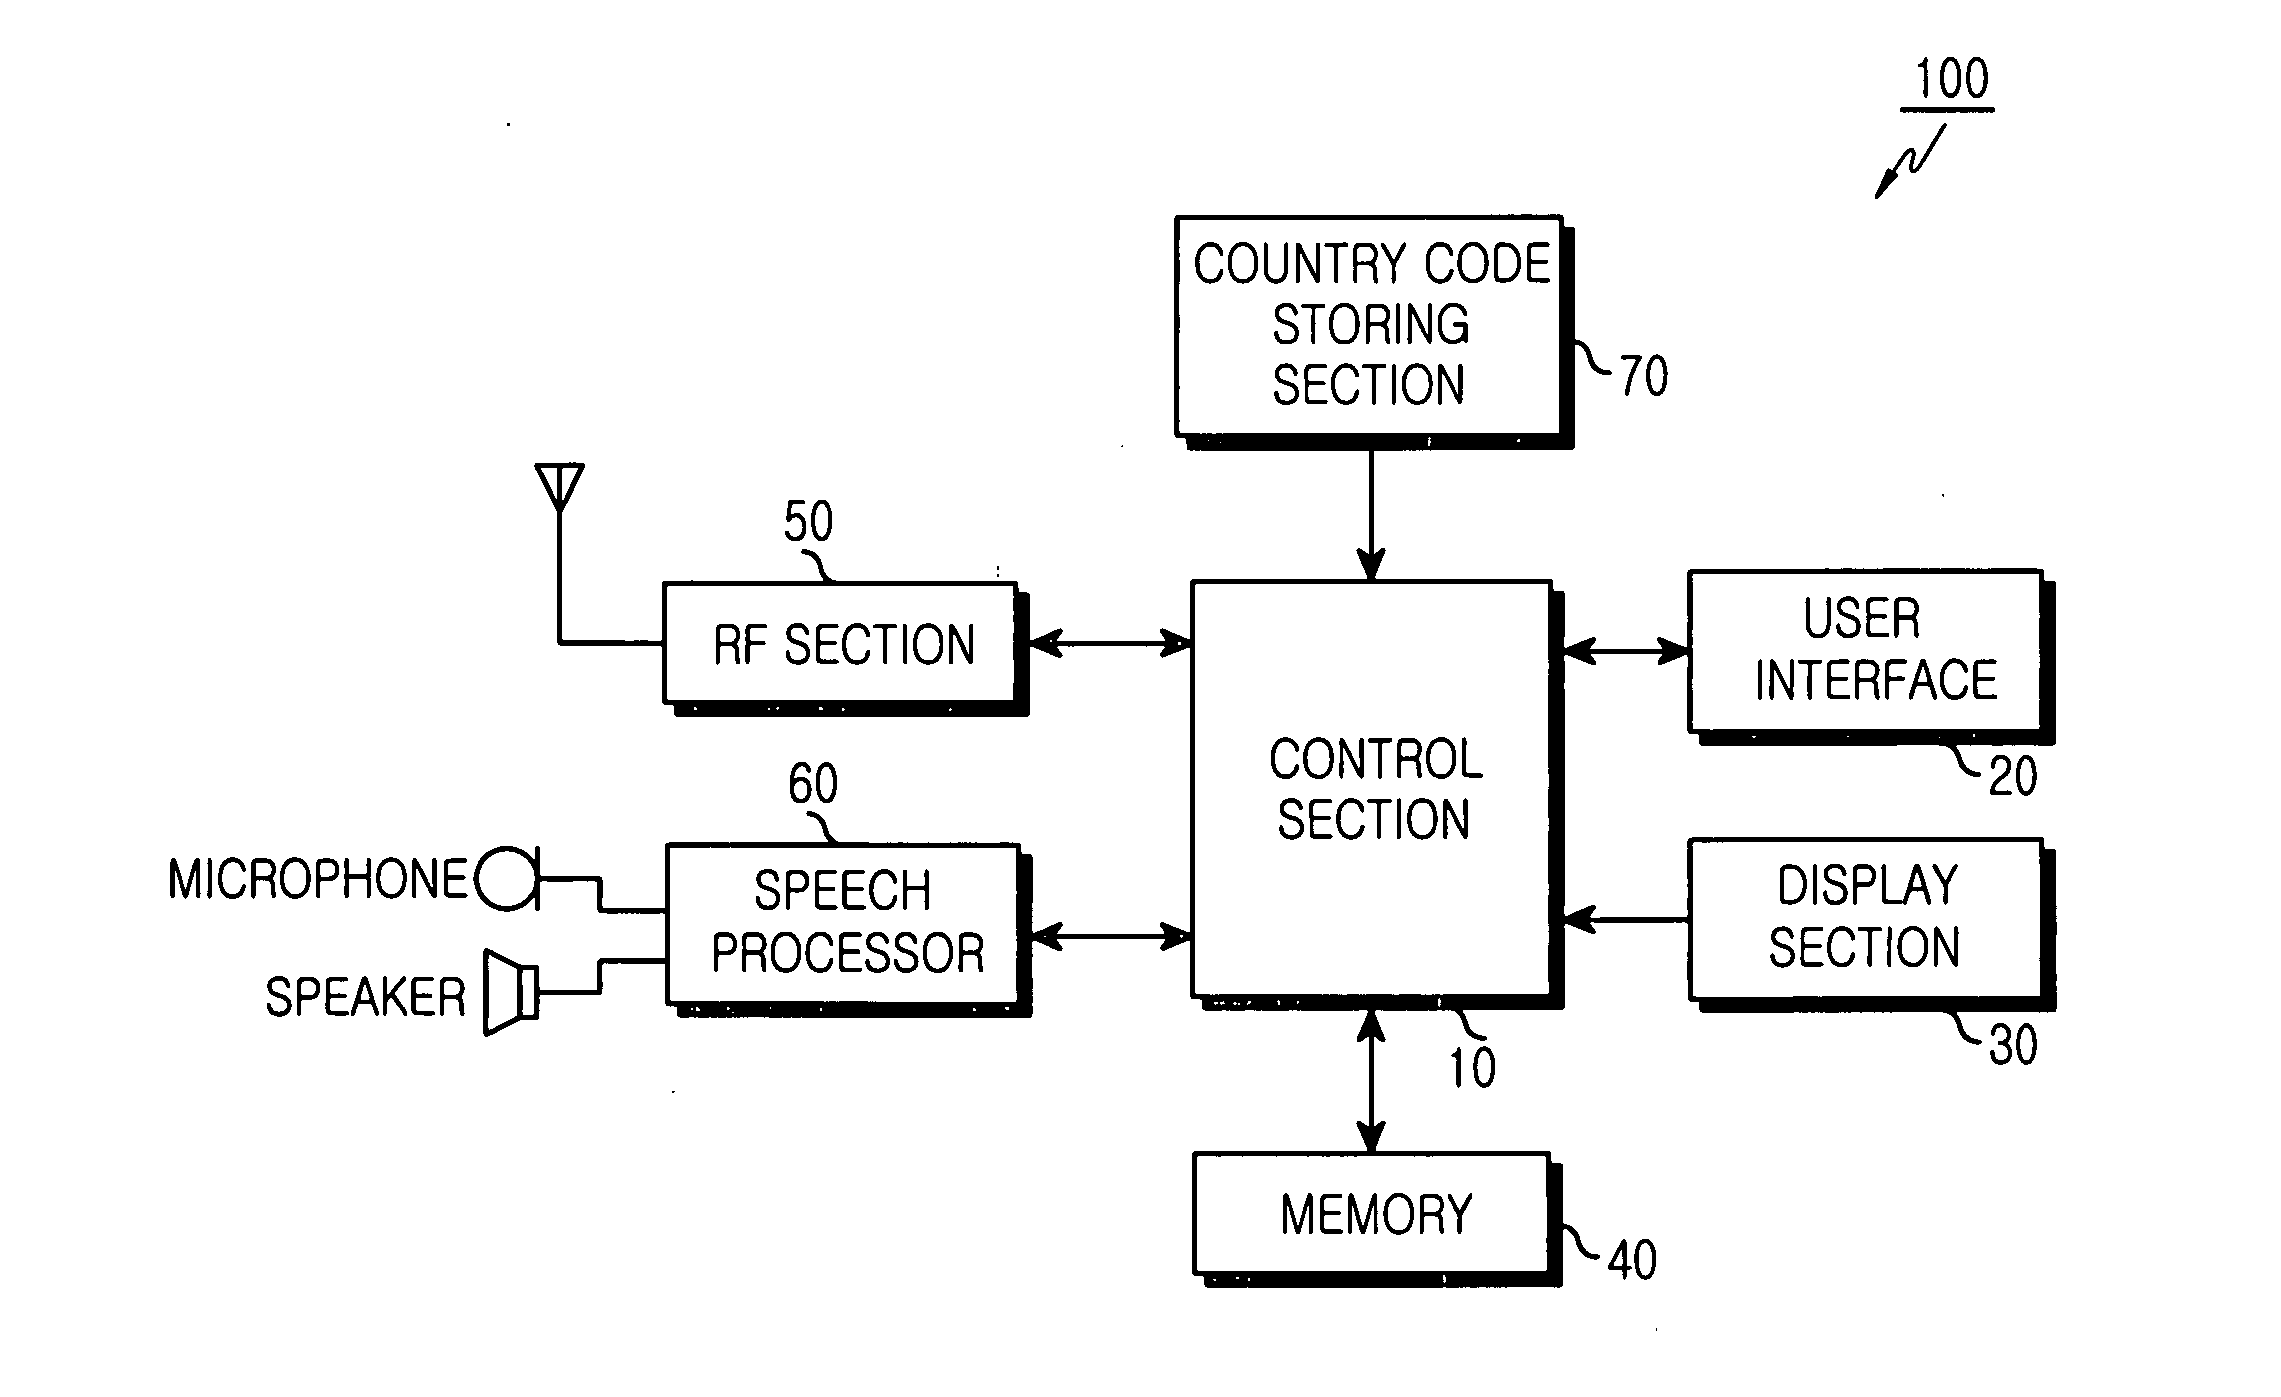 Mobile communication terminal and method for searching for country codes